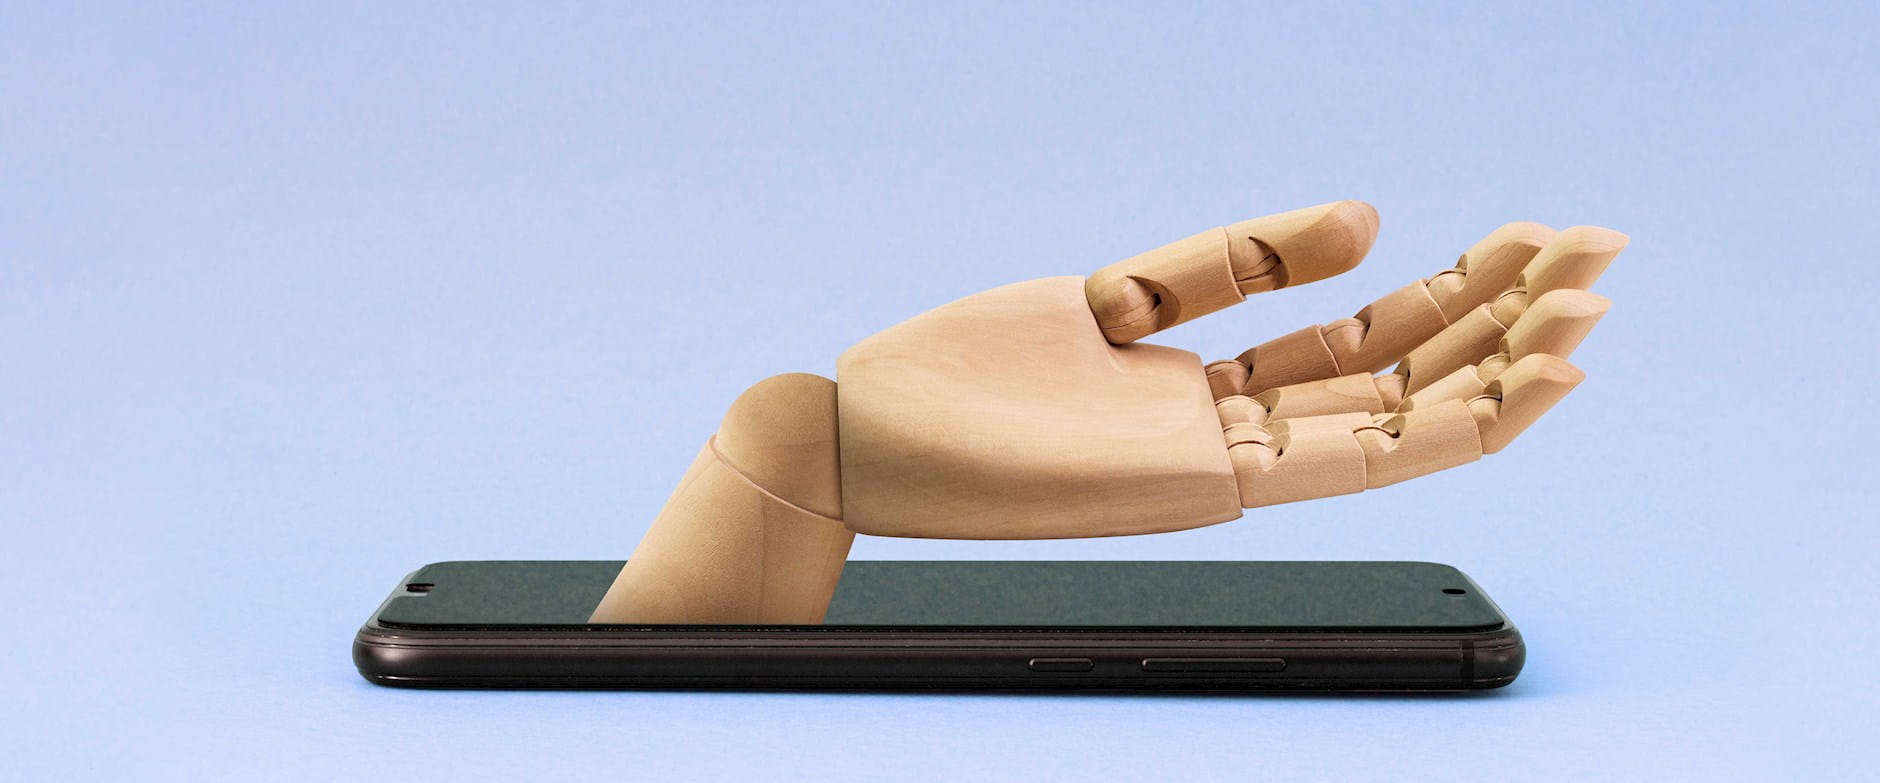 Wooden hand emerging from smartphone